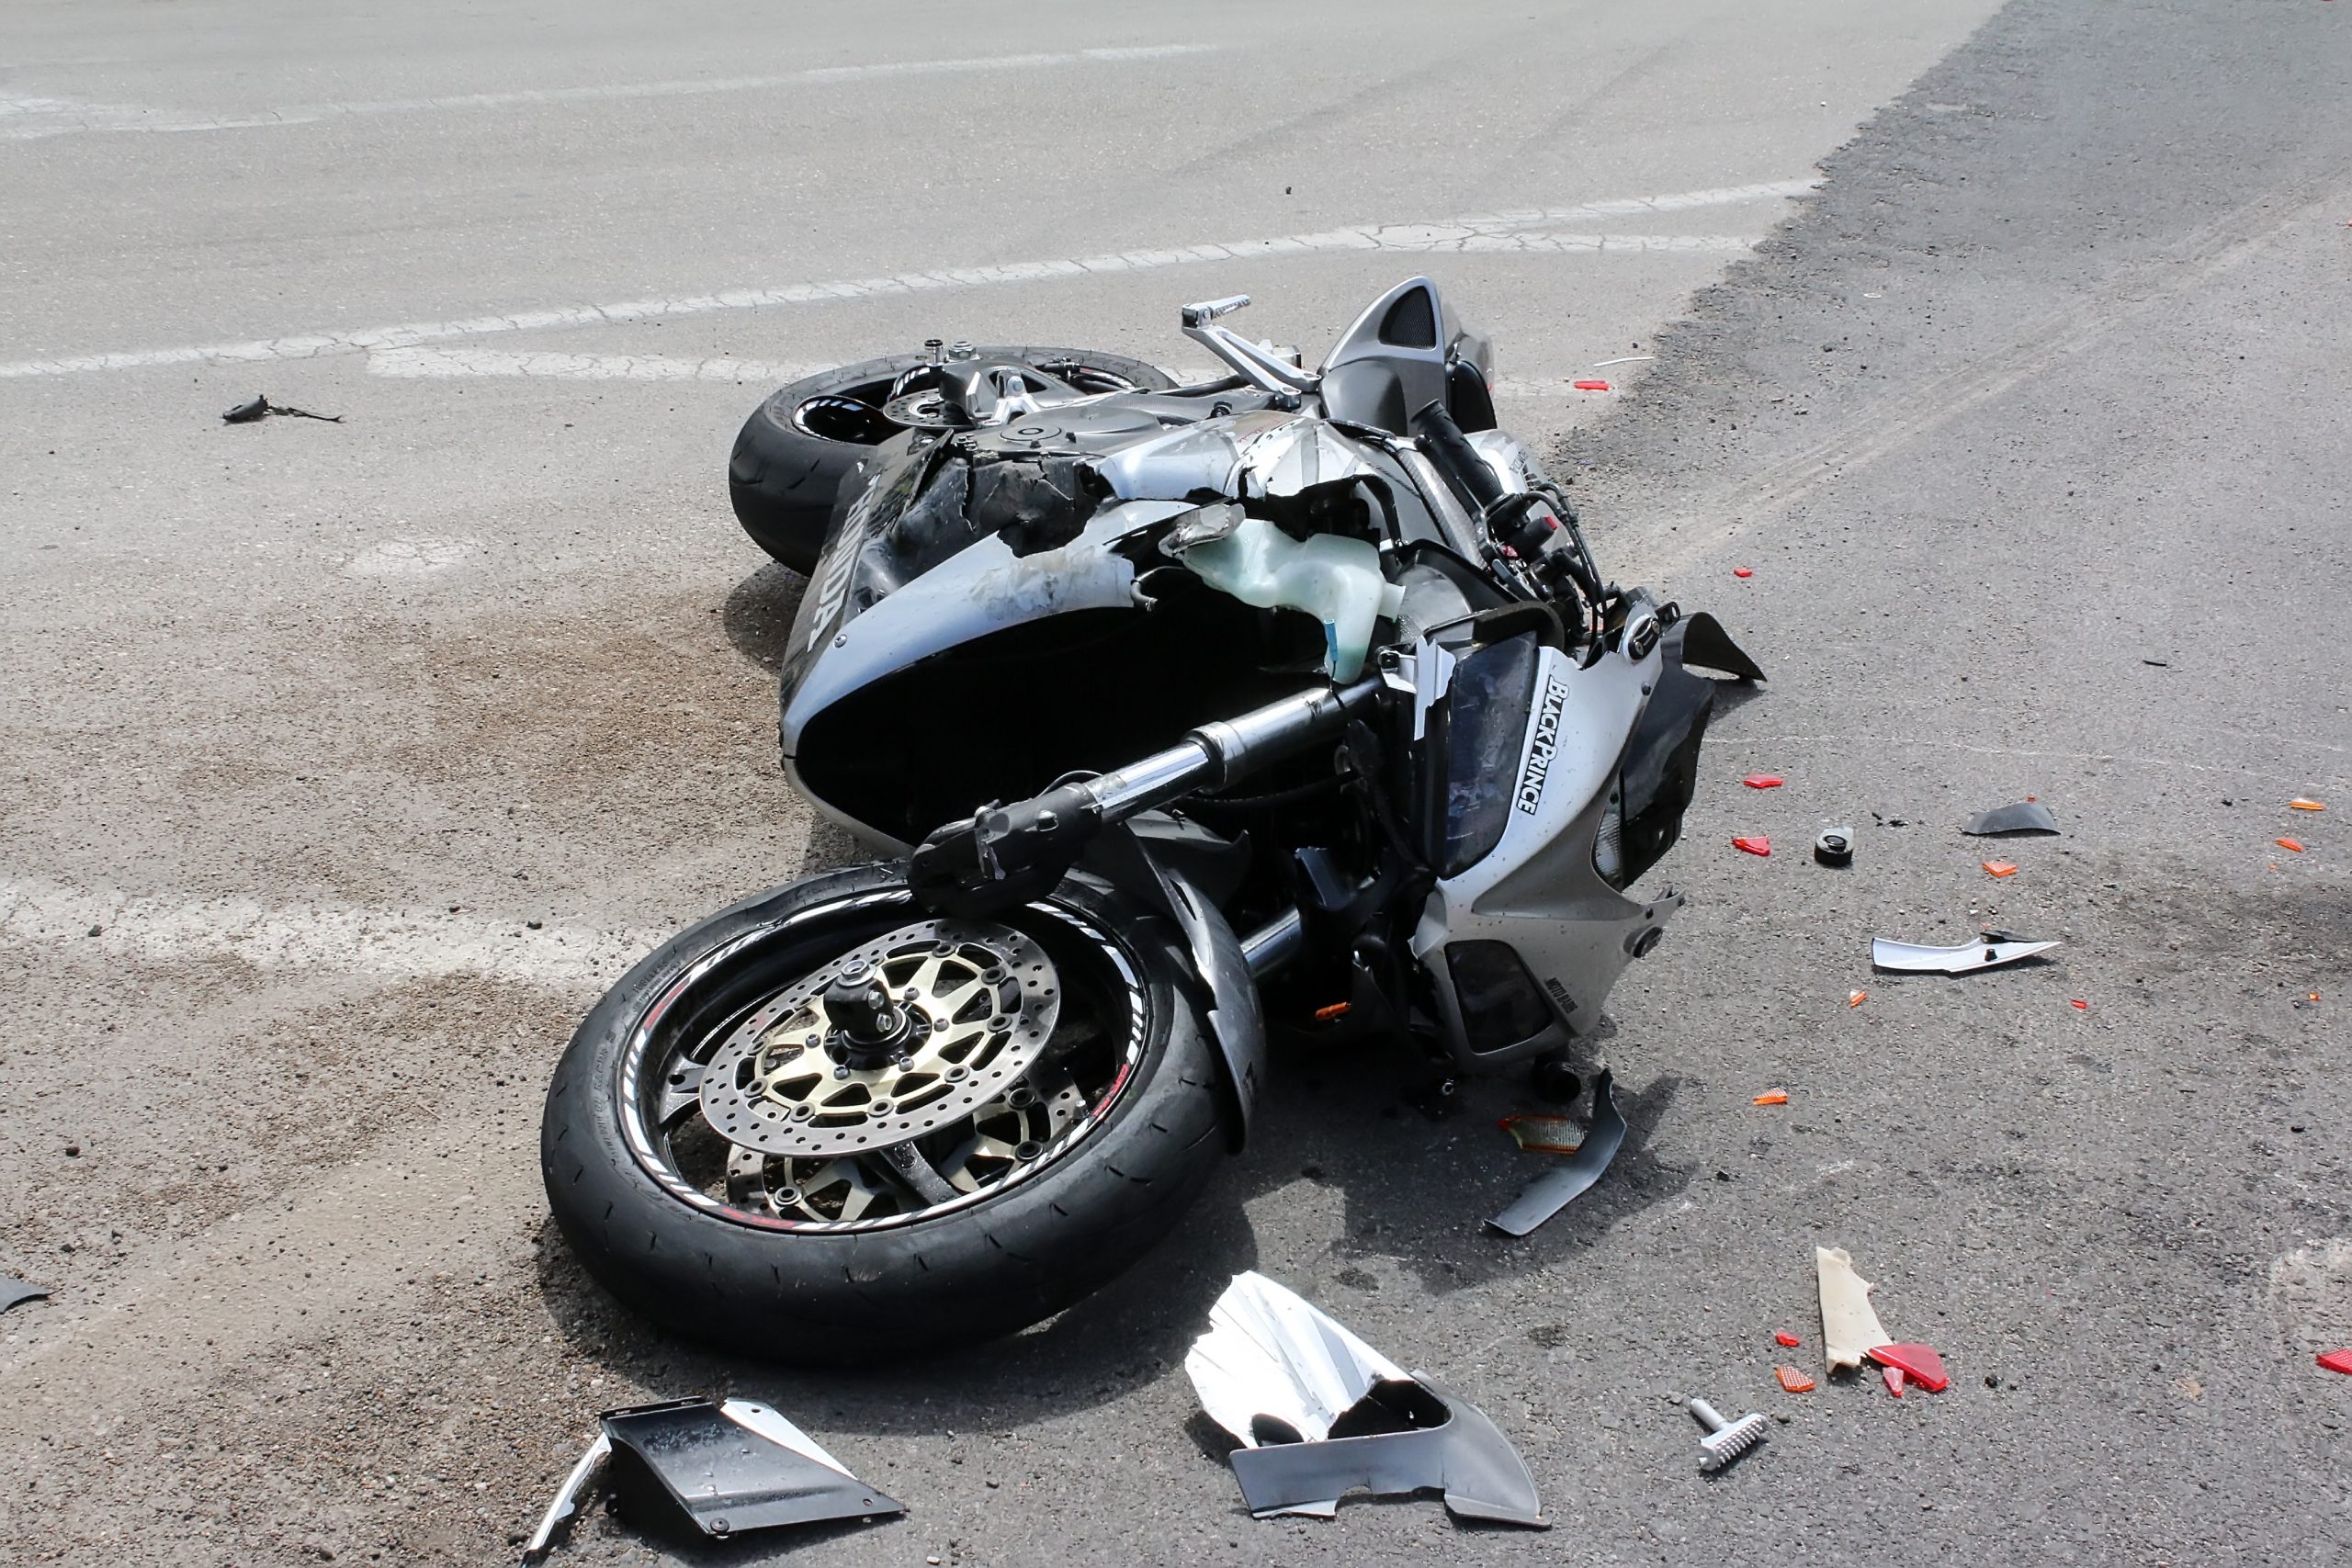 How Likely Is it to Get in a Motorcycle Accident?